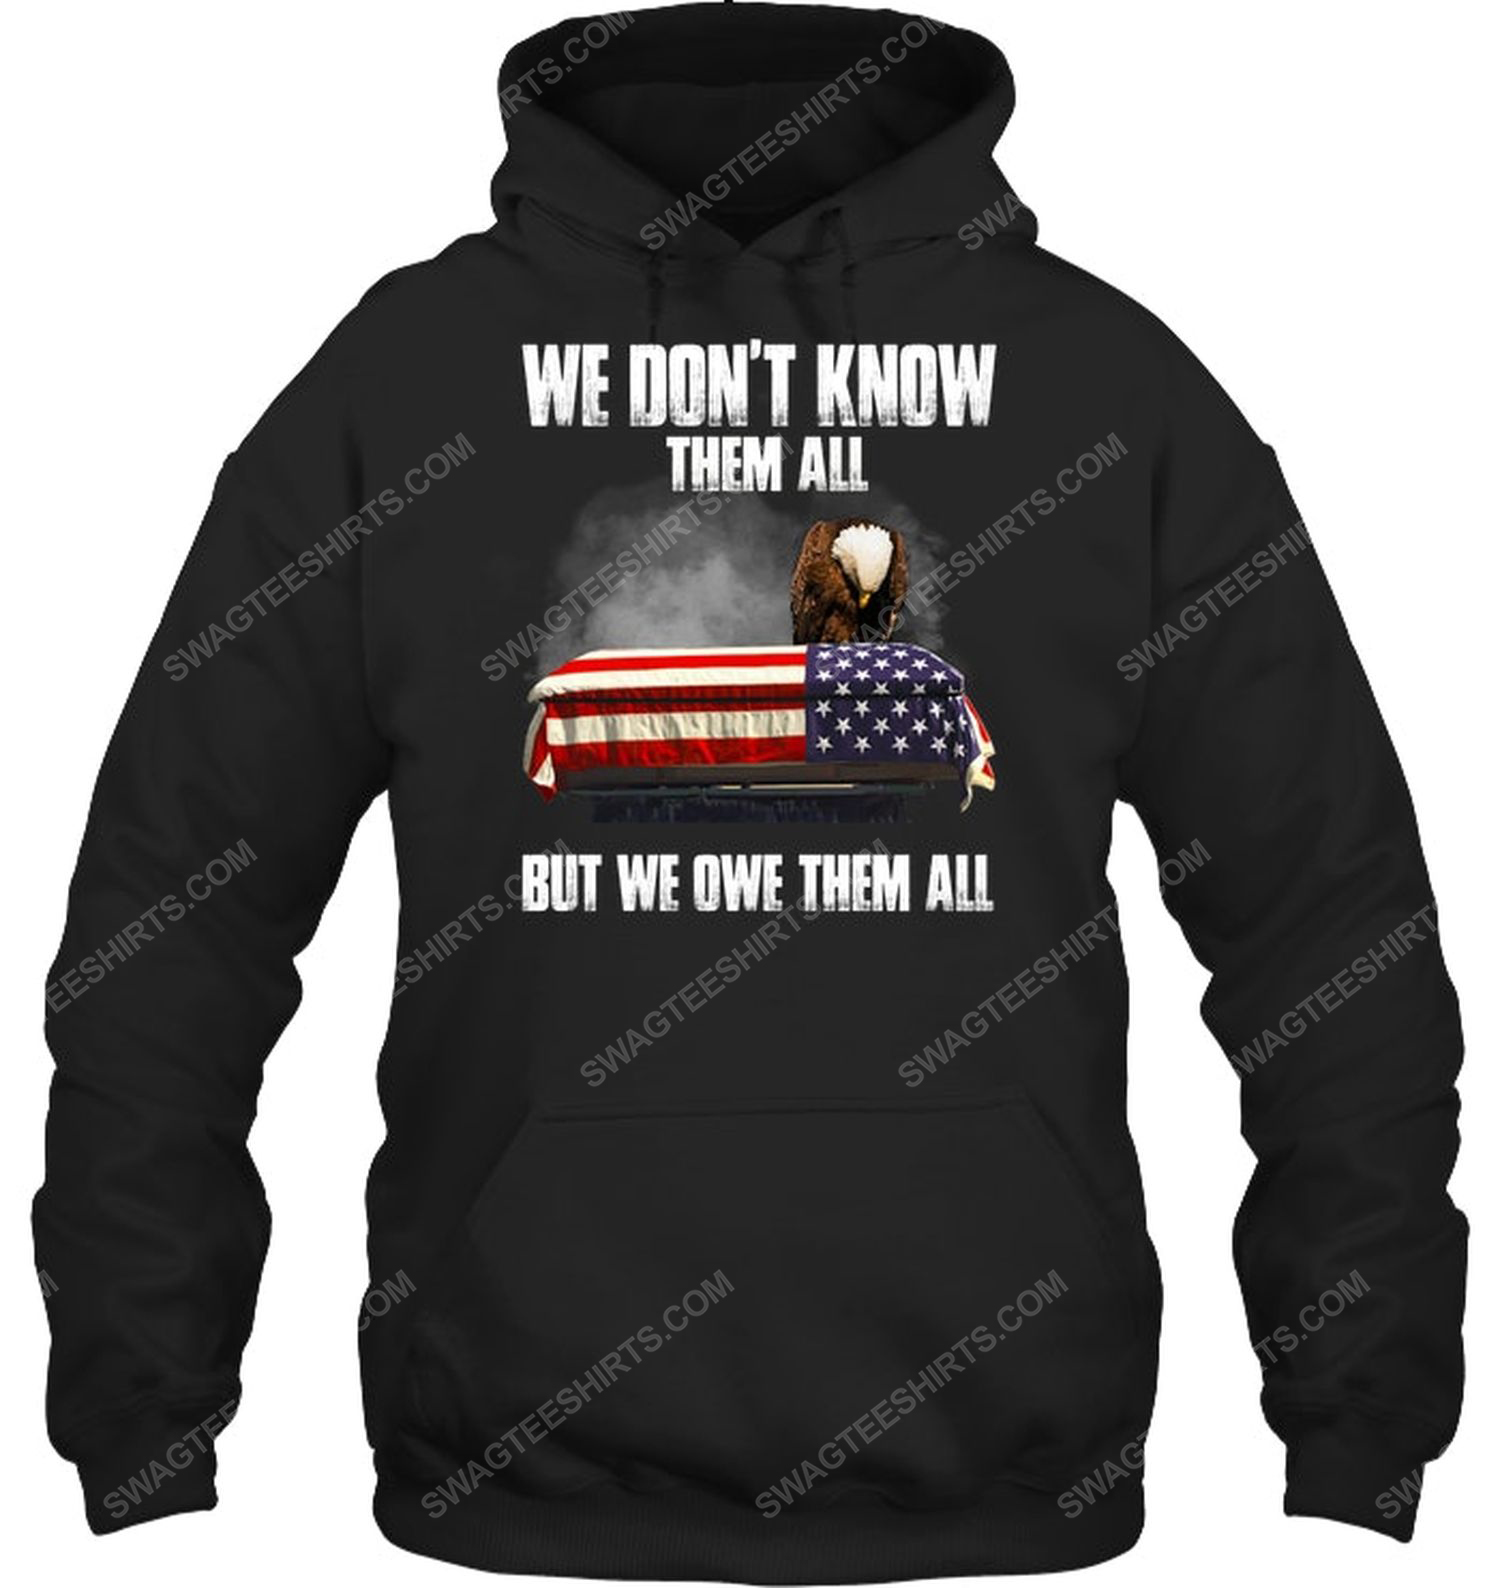 We don't know them all but we owe them all political hoodie